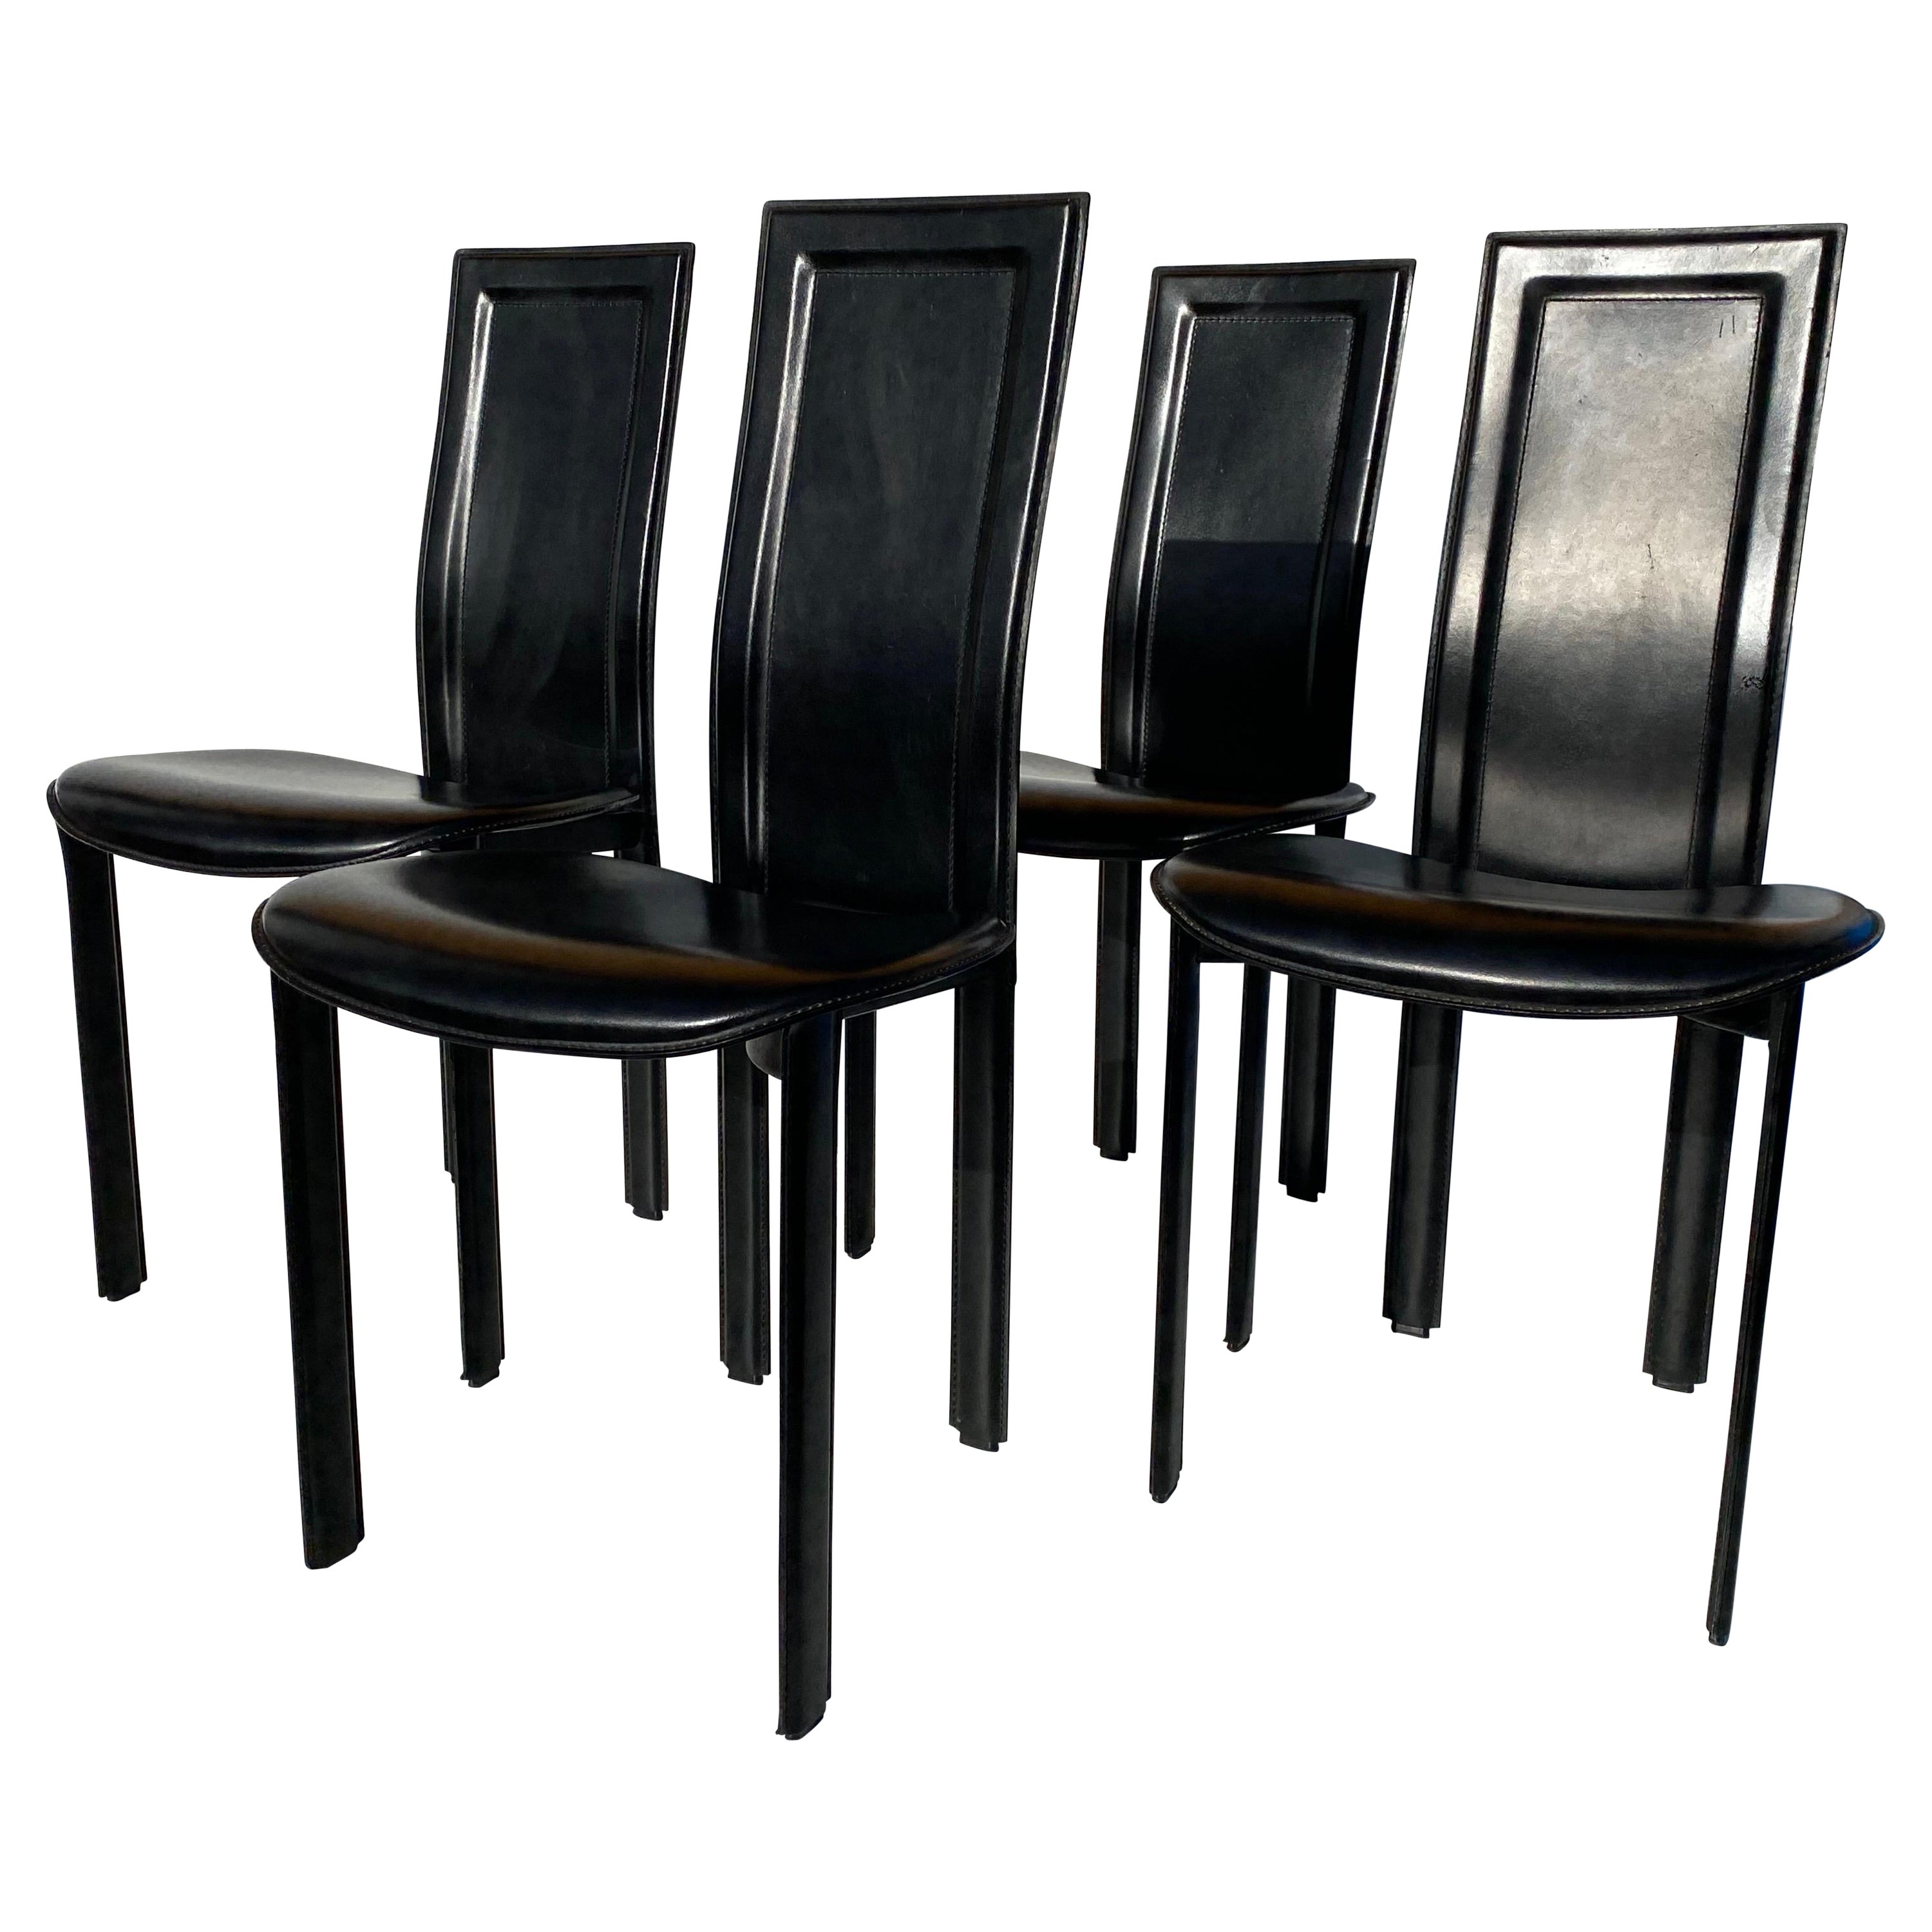 Set of Four Black Leather Chairs by Cattelan Italia For Sale